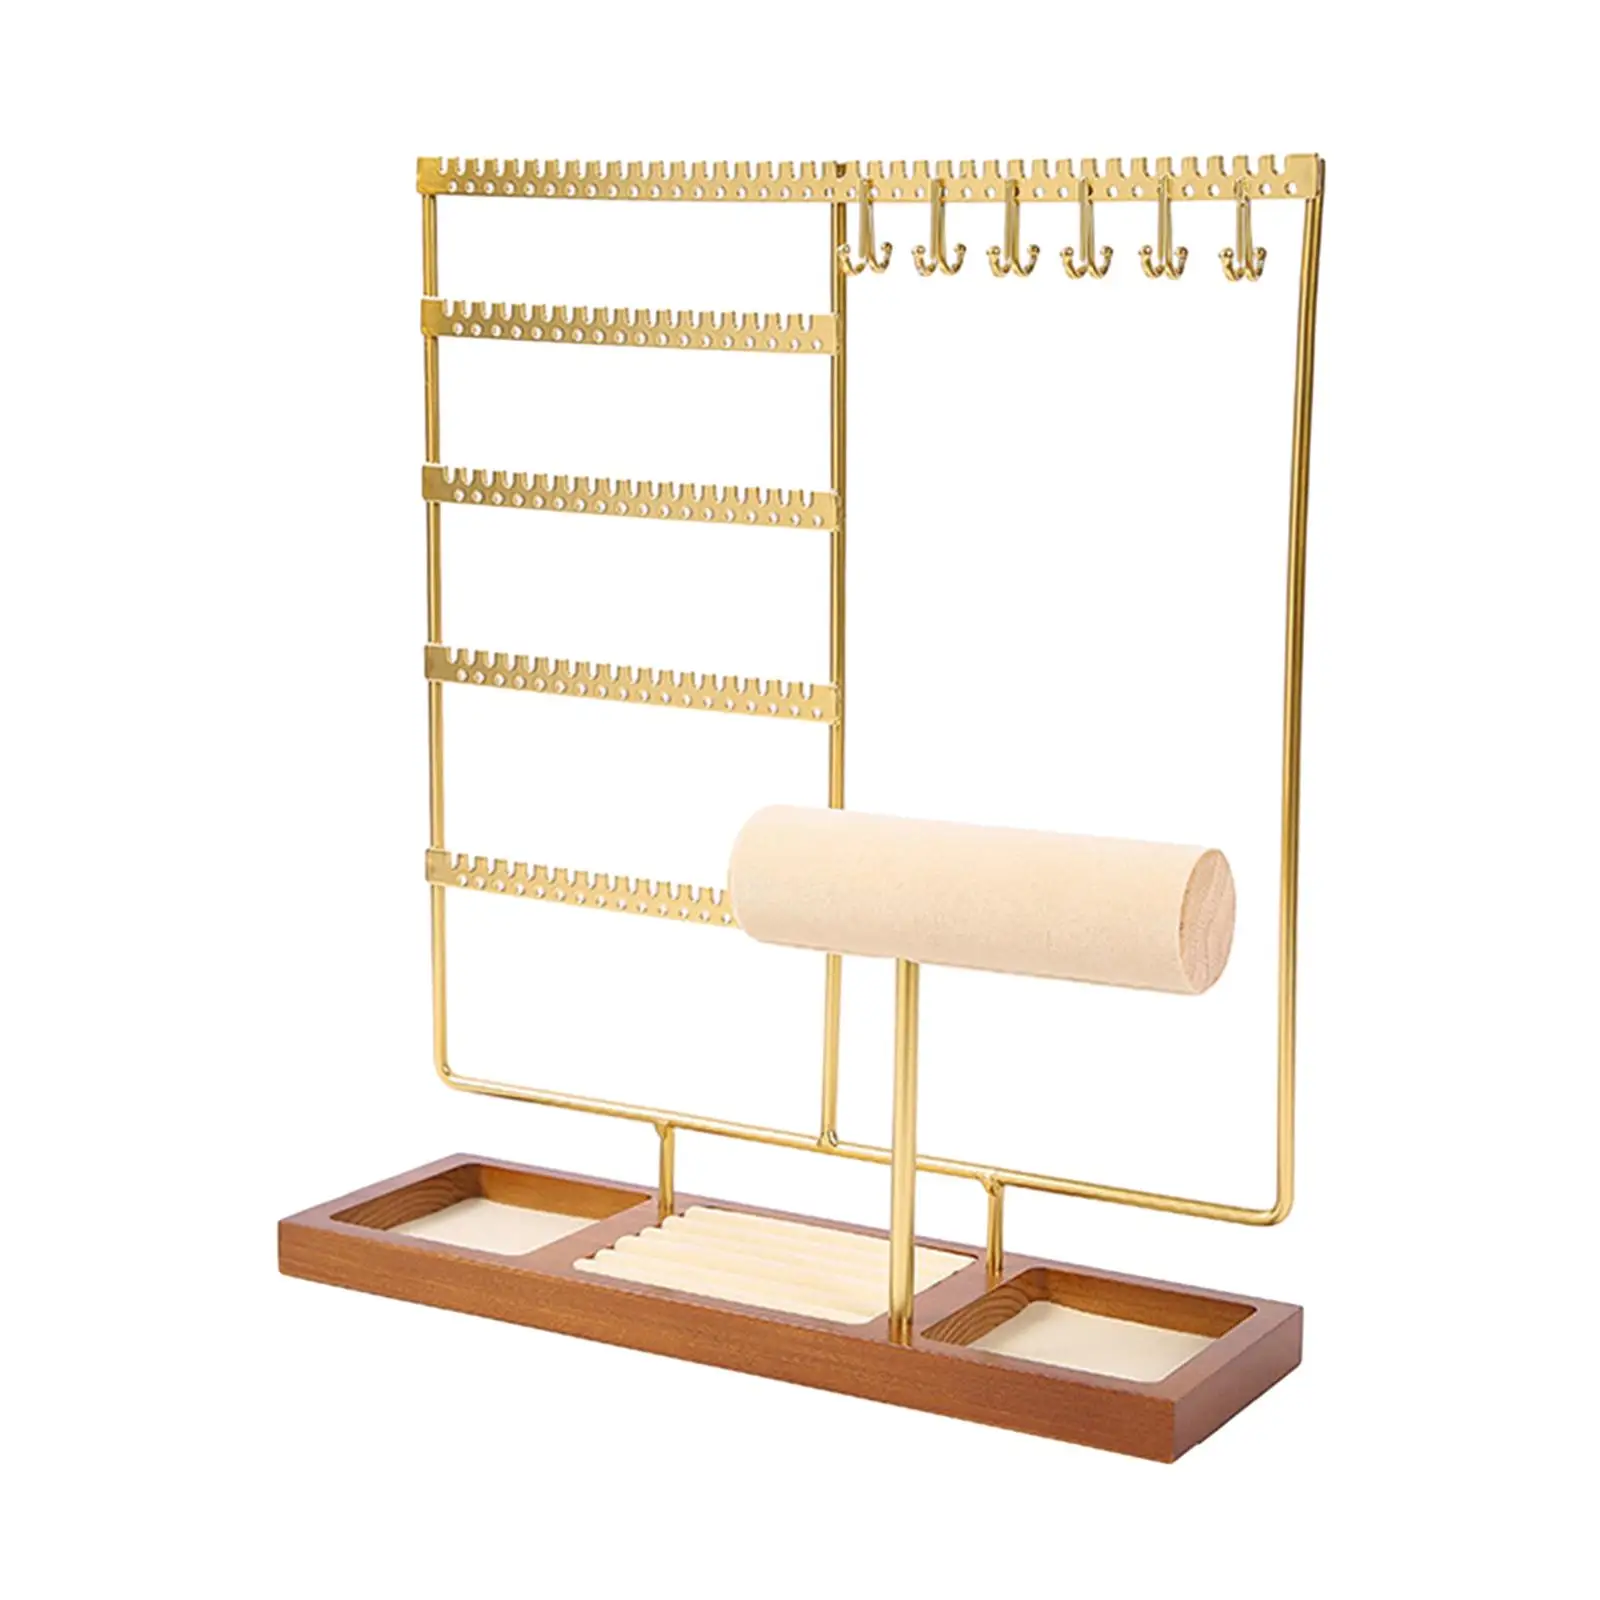 Jewelry Organizer Stand Holder Tabletop with Wood Tray Jewelry Holder for Props Live Broadcast Photography Shopping Mall Dresser